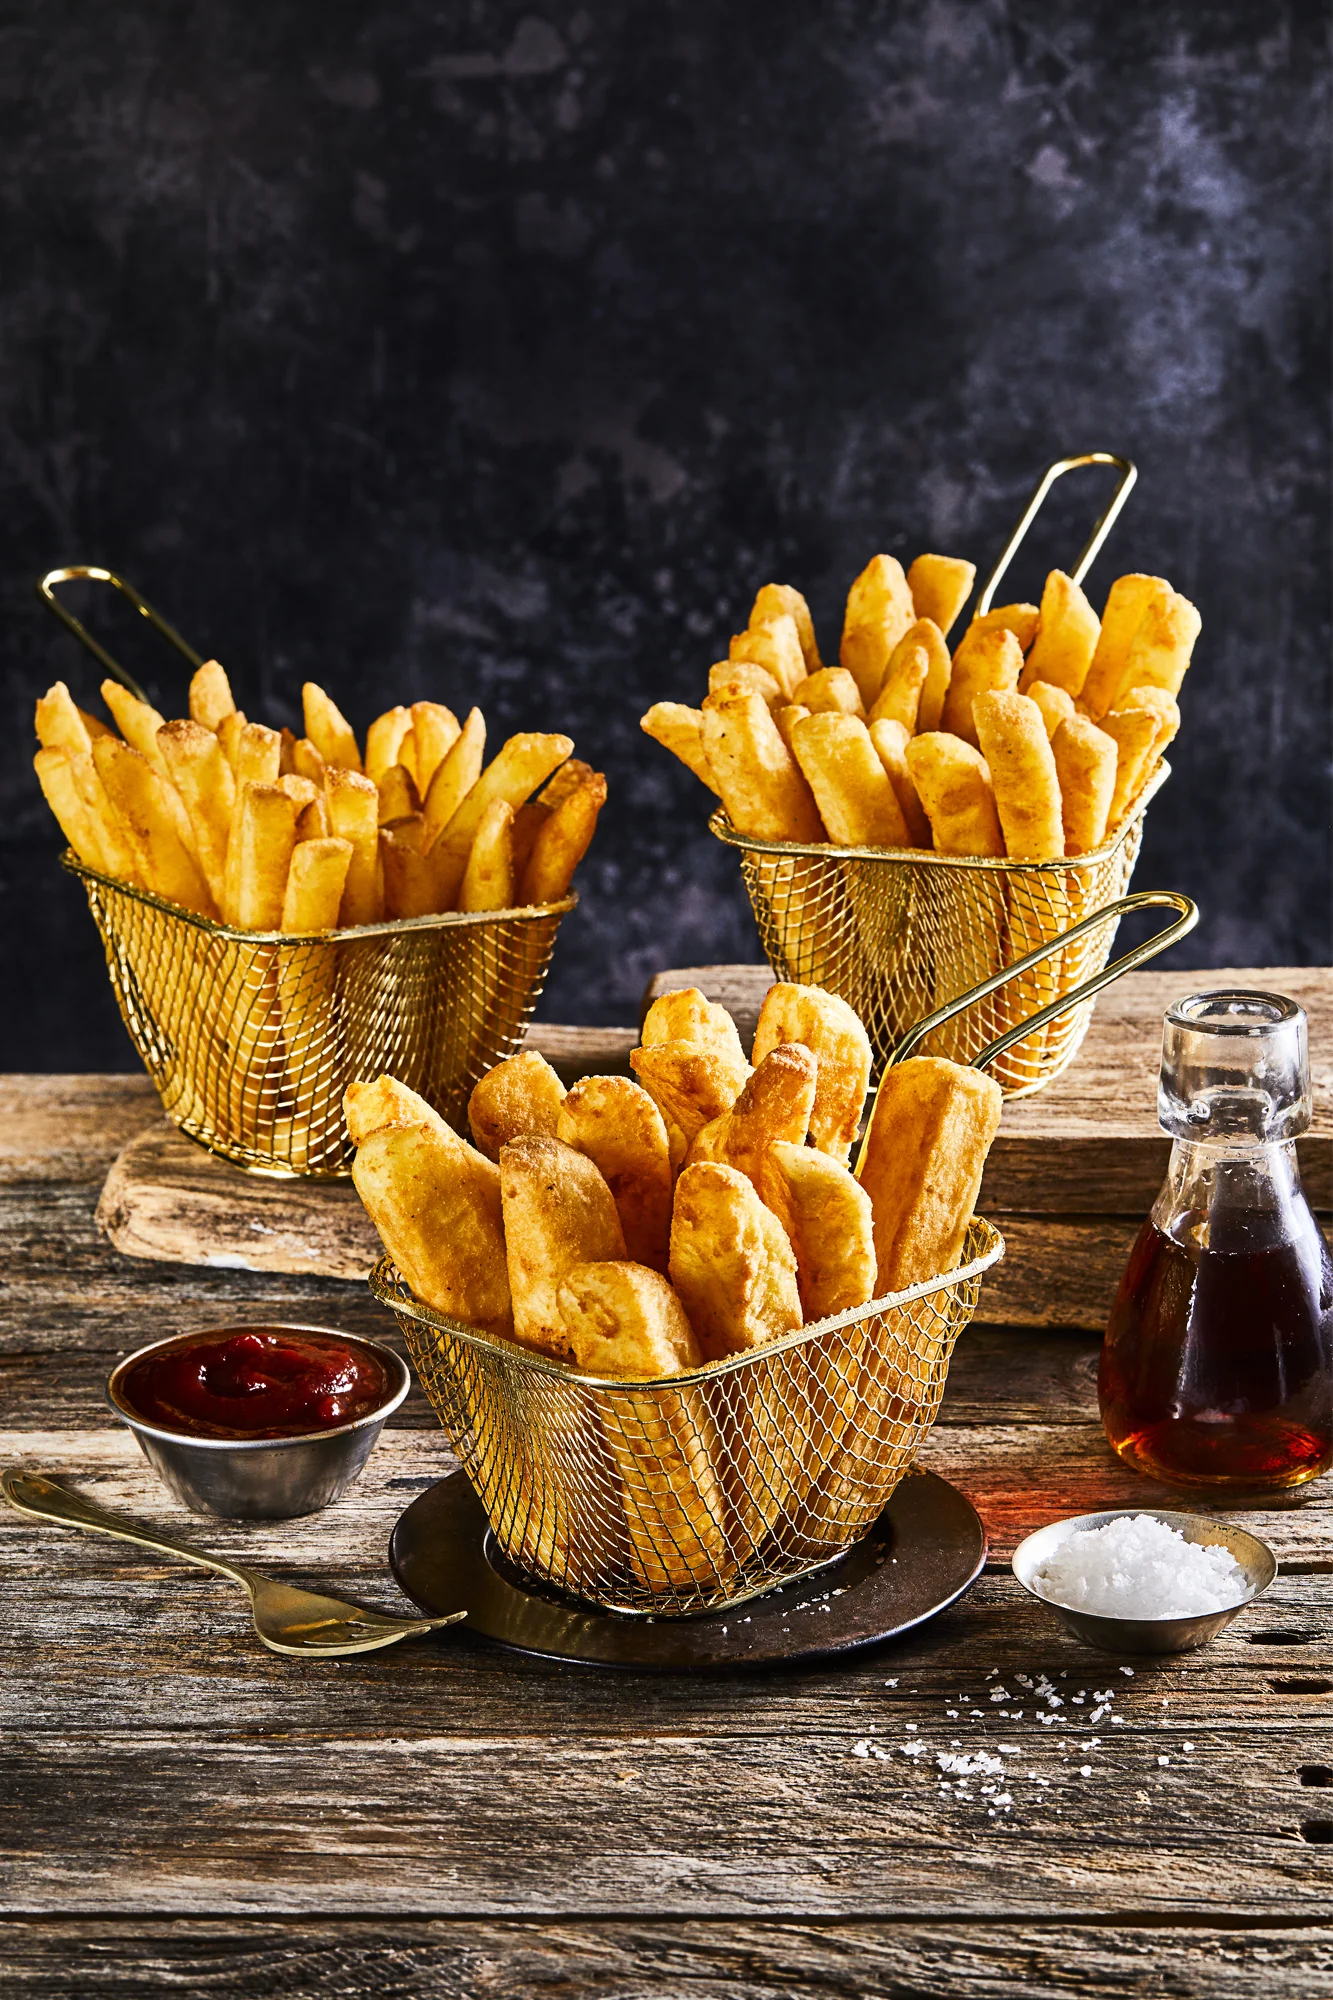 Chefs Selection Premium Chips in a serving basket